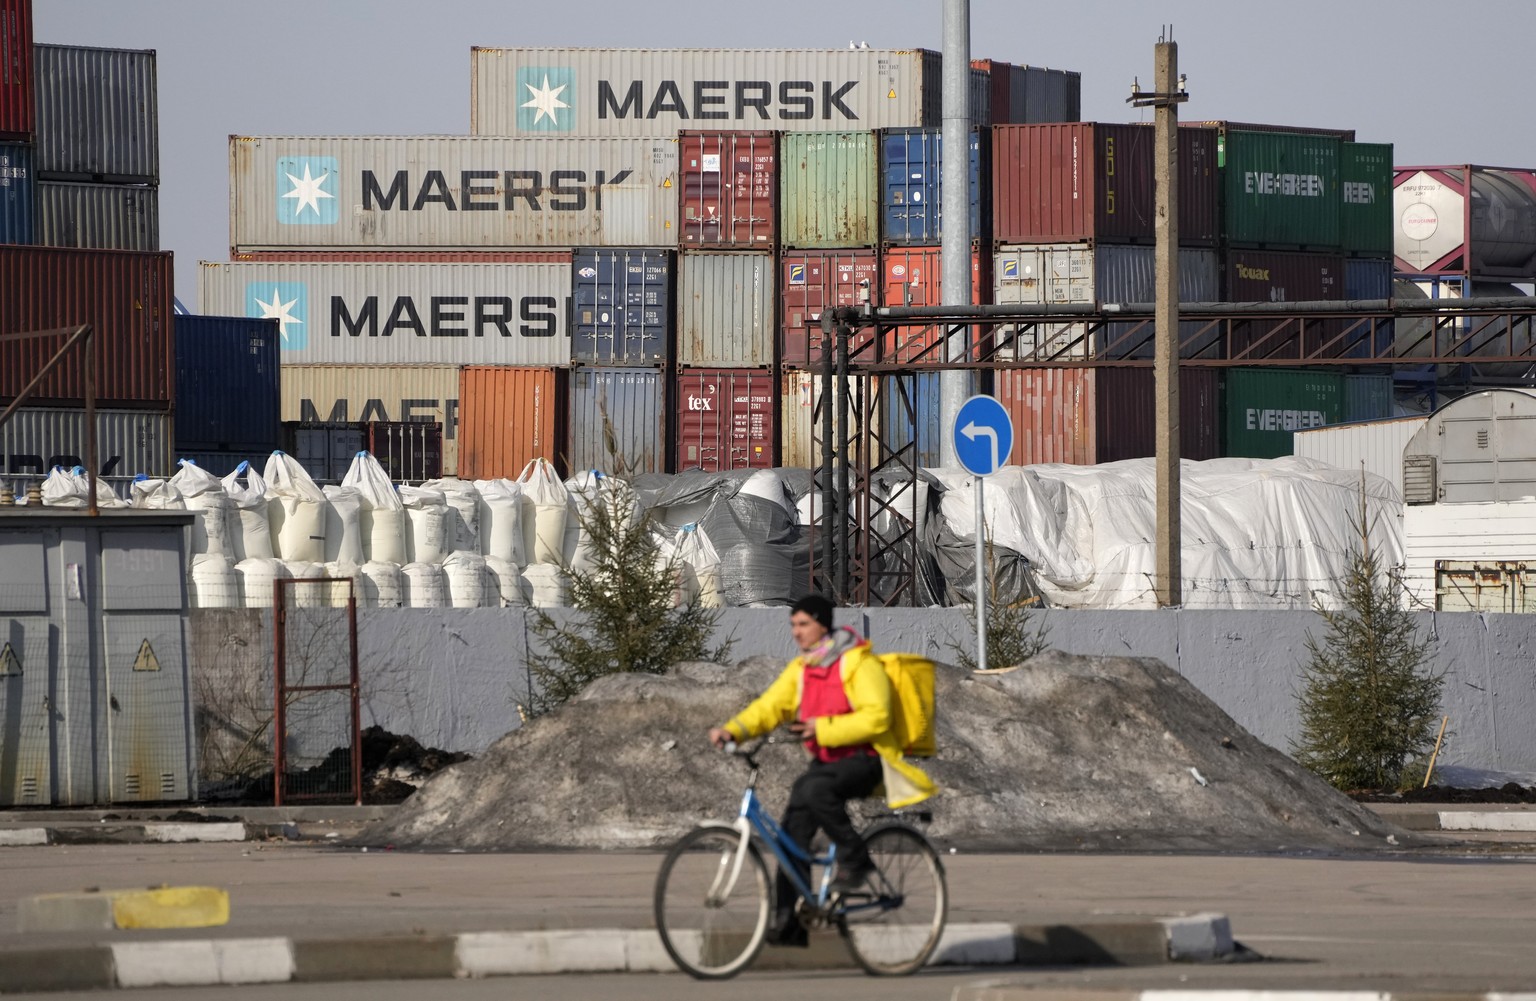 Shipping containers from the Maersk company are seen among others at a transshipment terminal in St. Petersburg, Russia, Thursday, March 24, 2022. Danish shipping company Maersk has suspended bookings ...